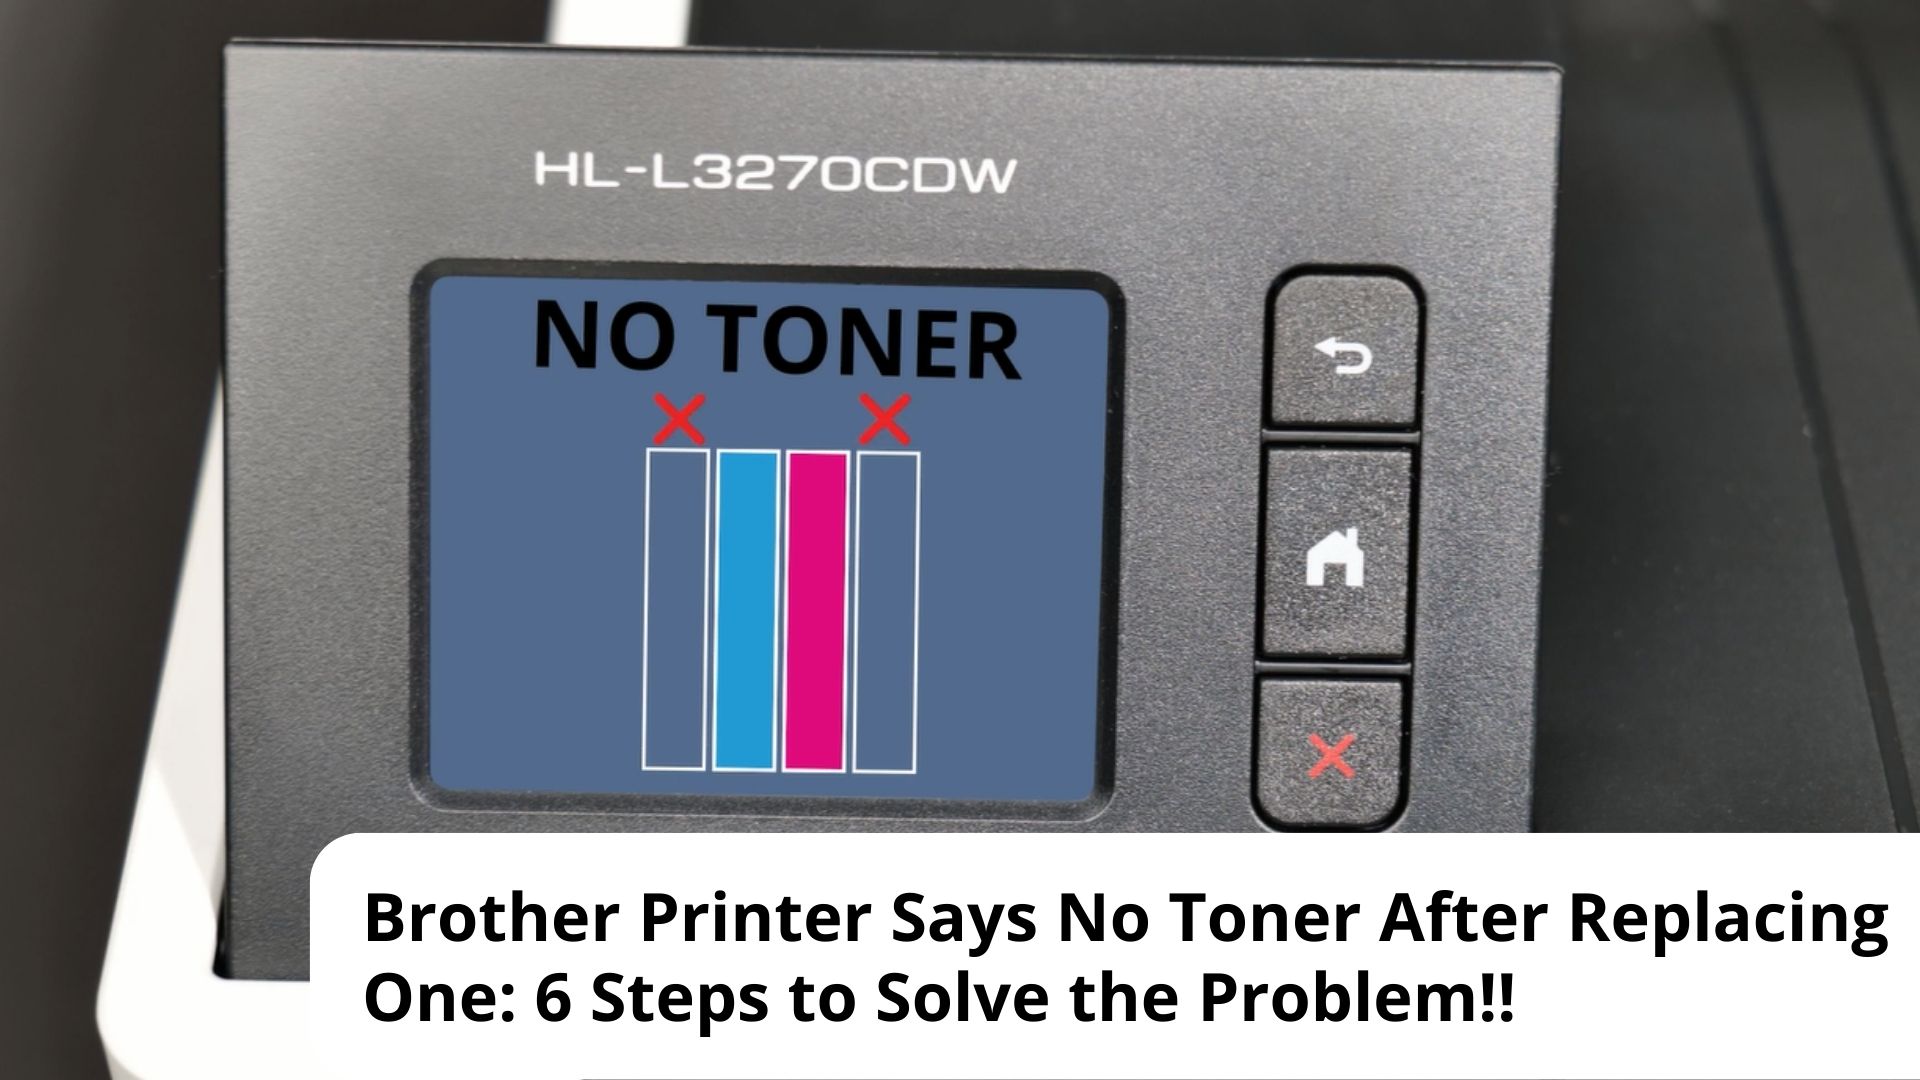 What to Do When Brother Printer Says No Toner After Replacing Toner